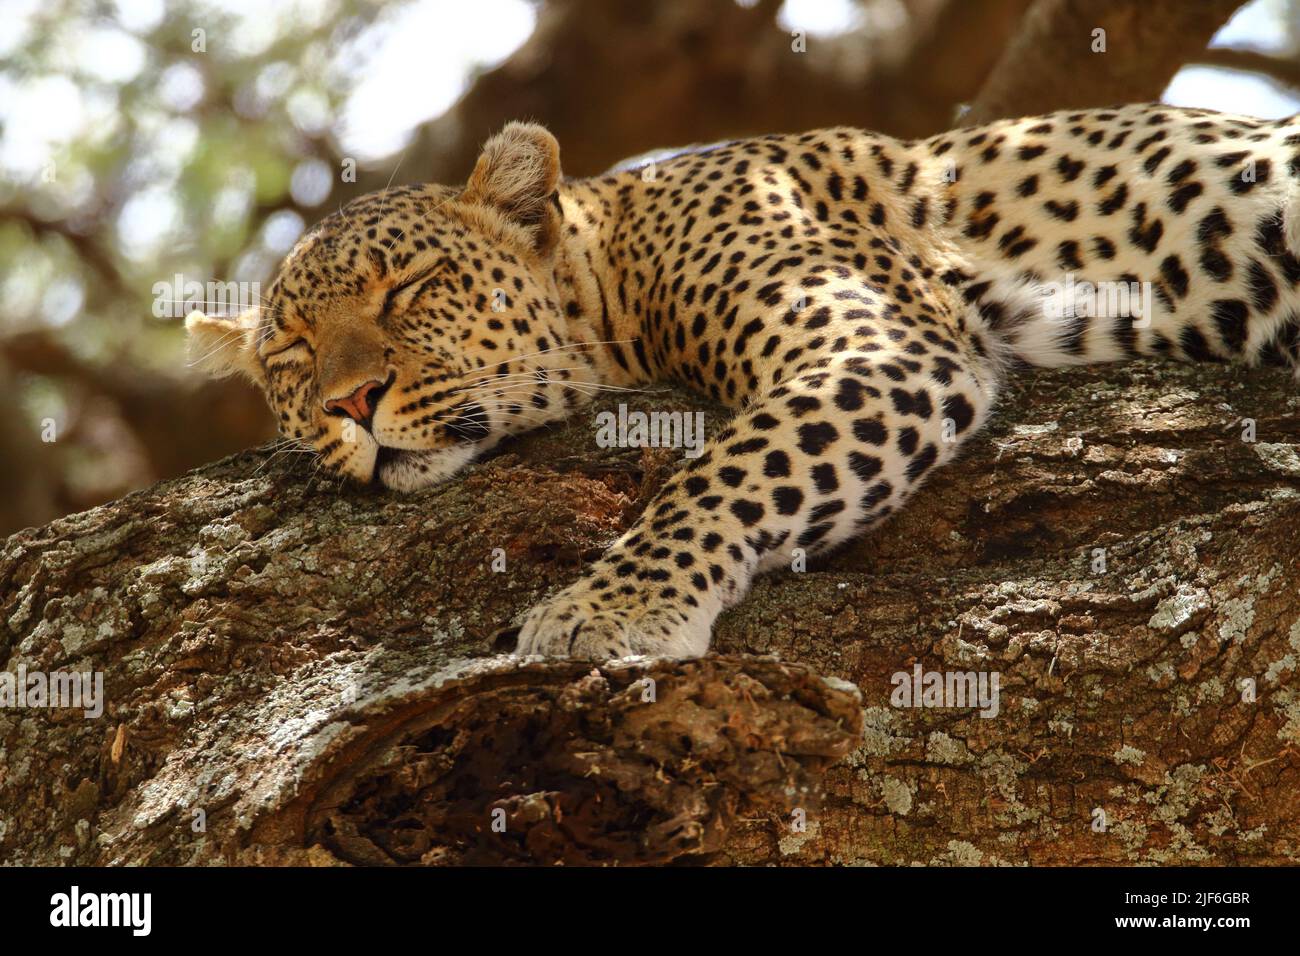 Leopard found sleeping in a tree in the middle of the day Stock Photo